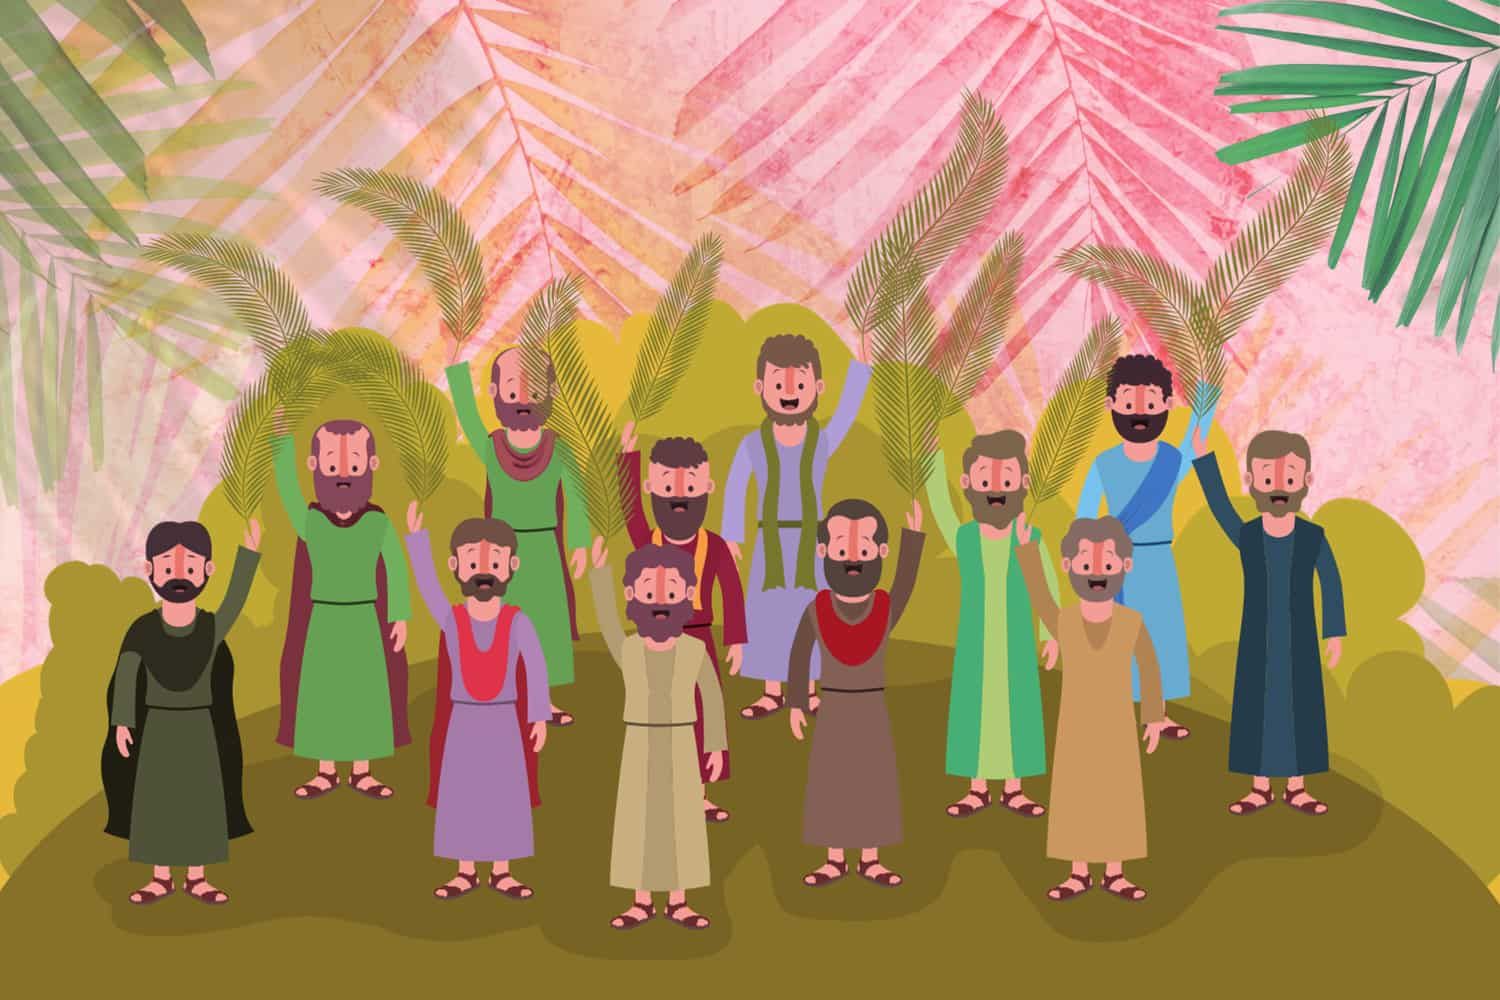 Lesson%20-%20NT%20Easter%2001%20-%20Palm%20Sunday%201%20Hosanna%20to%20the%20king-7298cb7c Jesus - His encounters